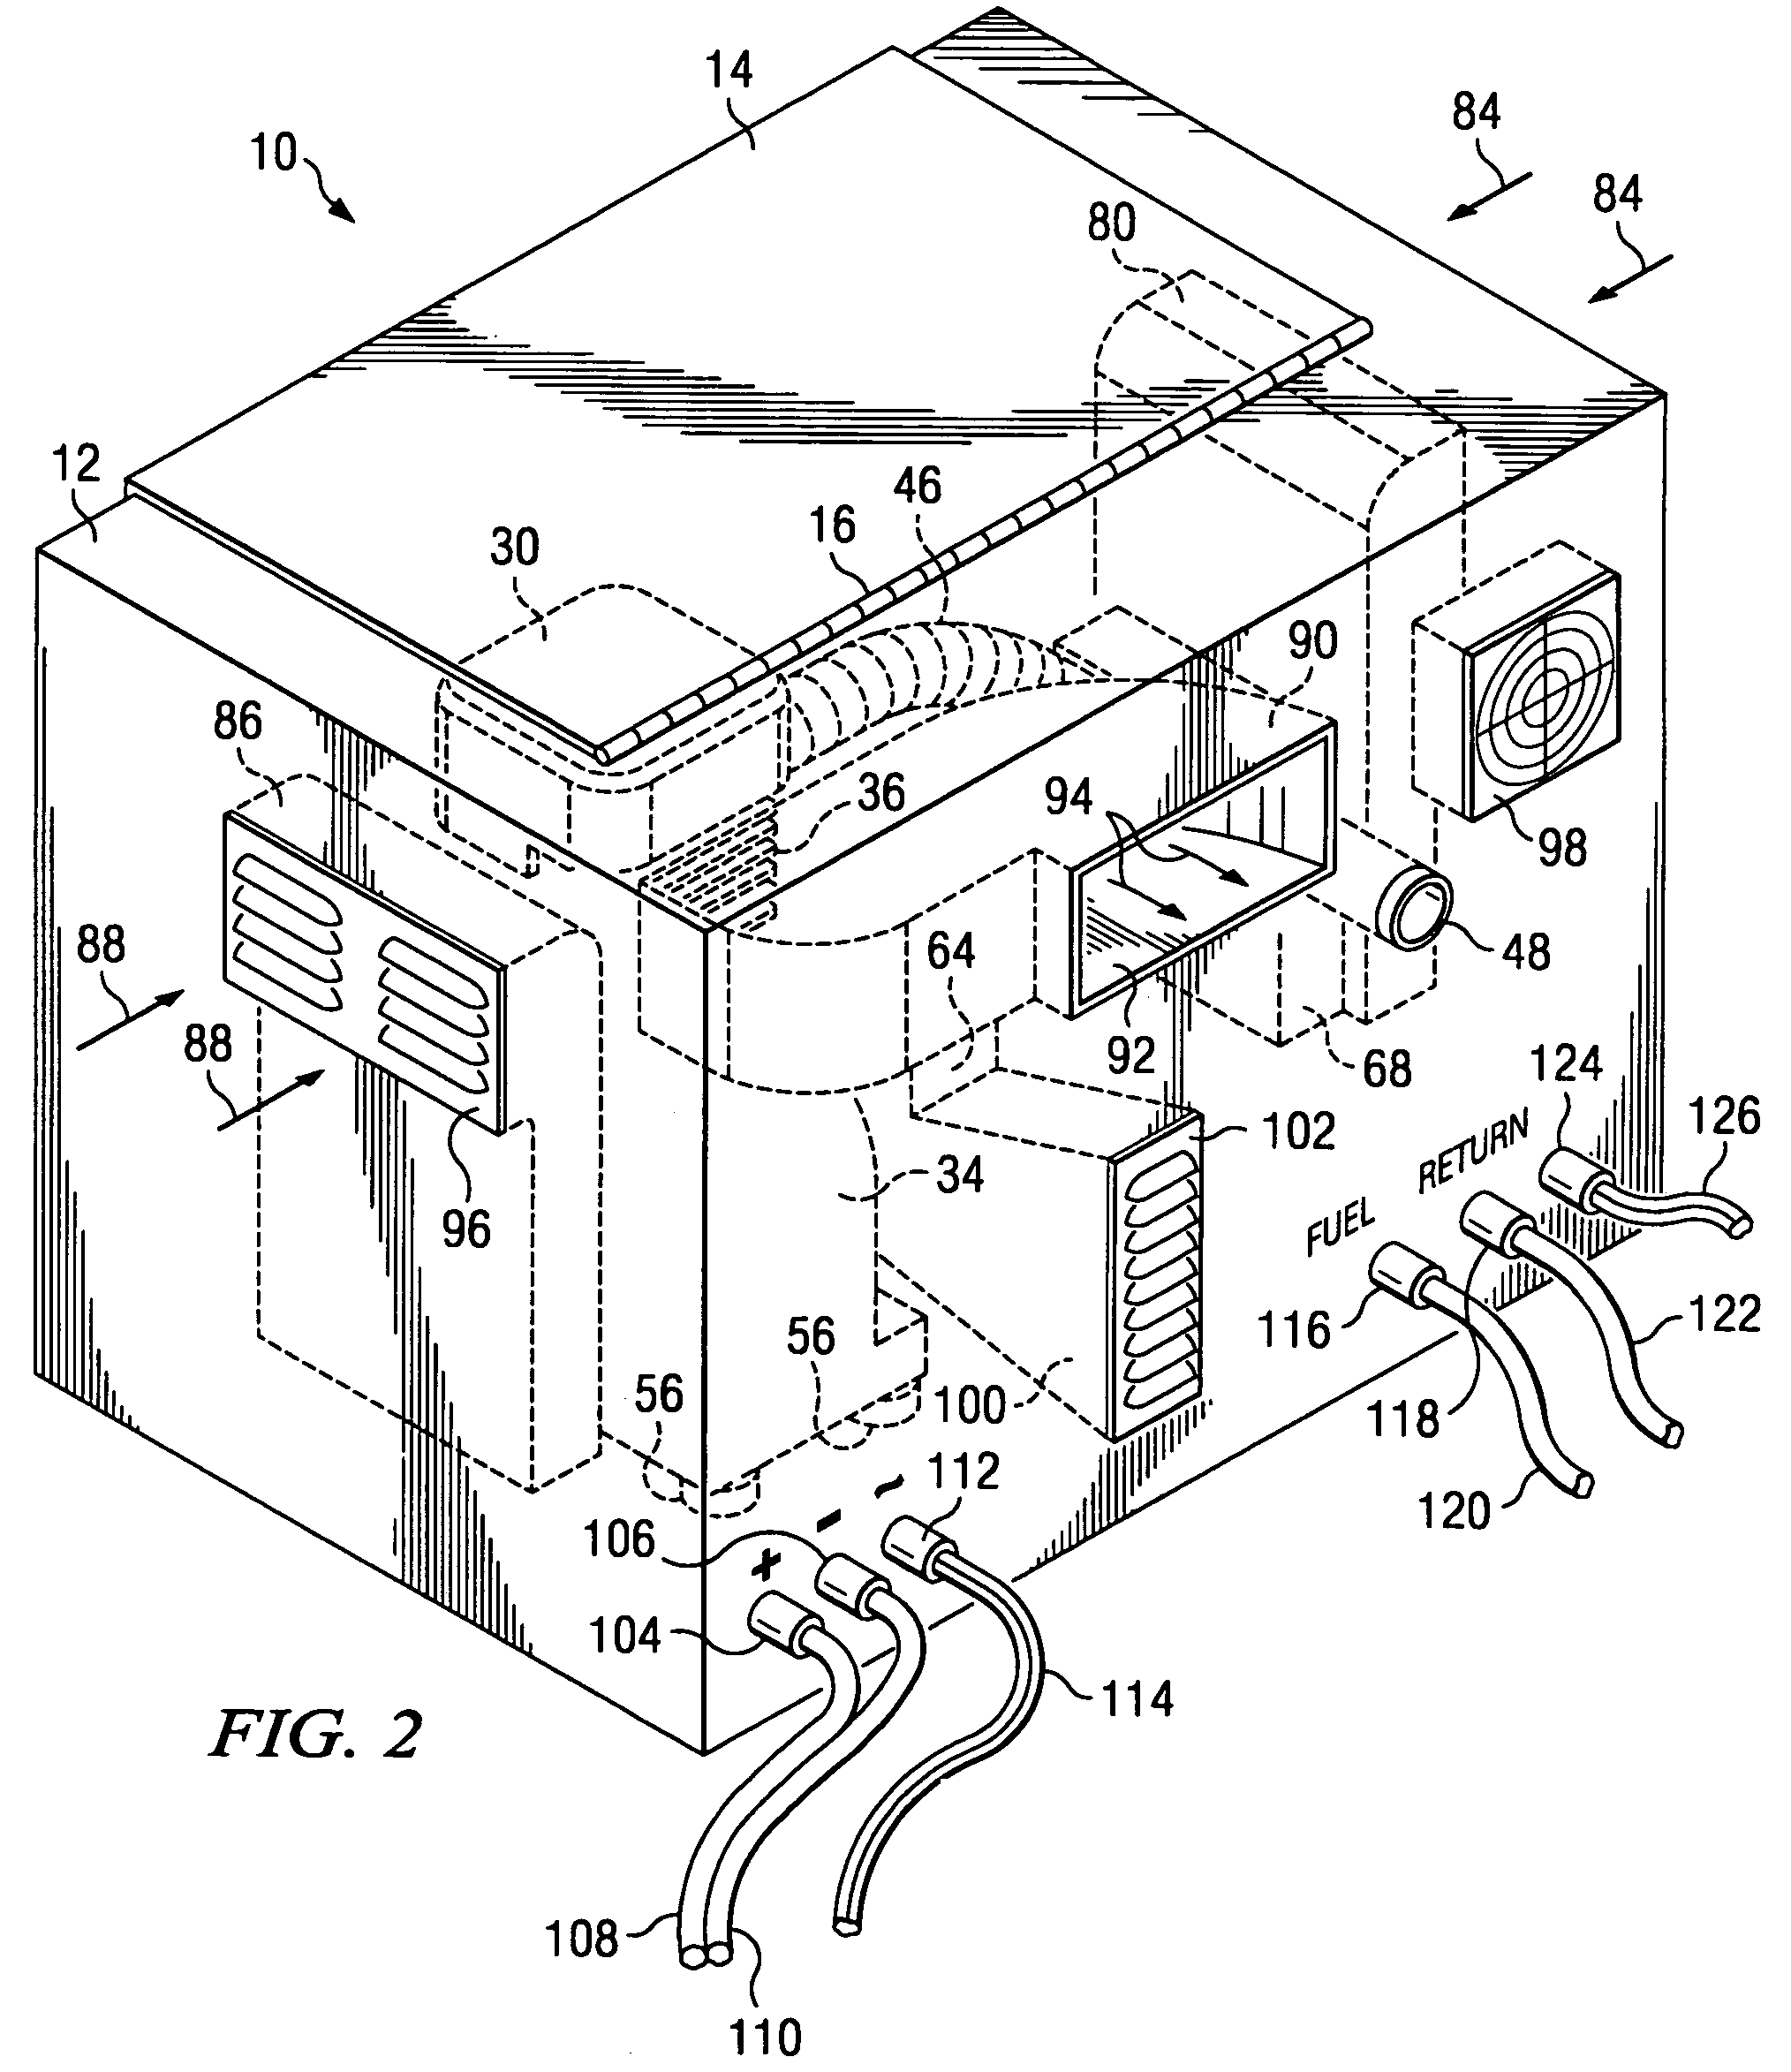 Auxiliary power unit for a diesel powered transport vehicle